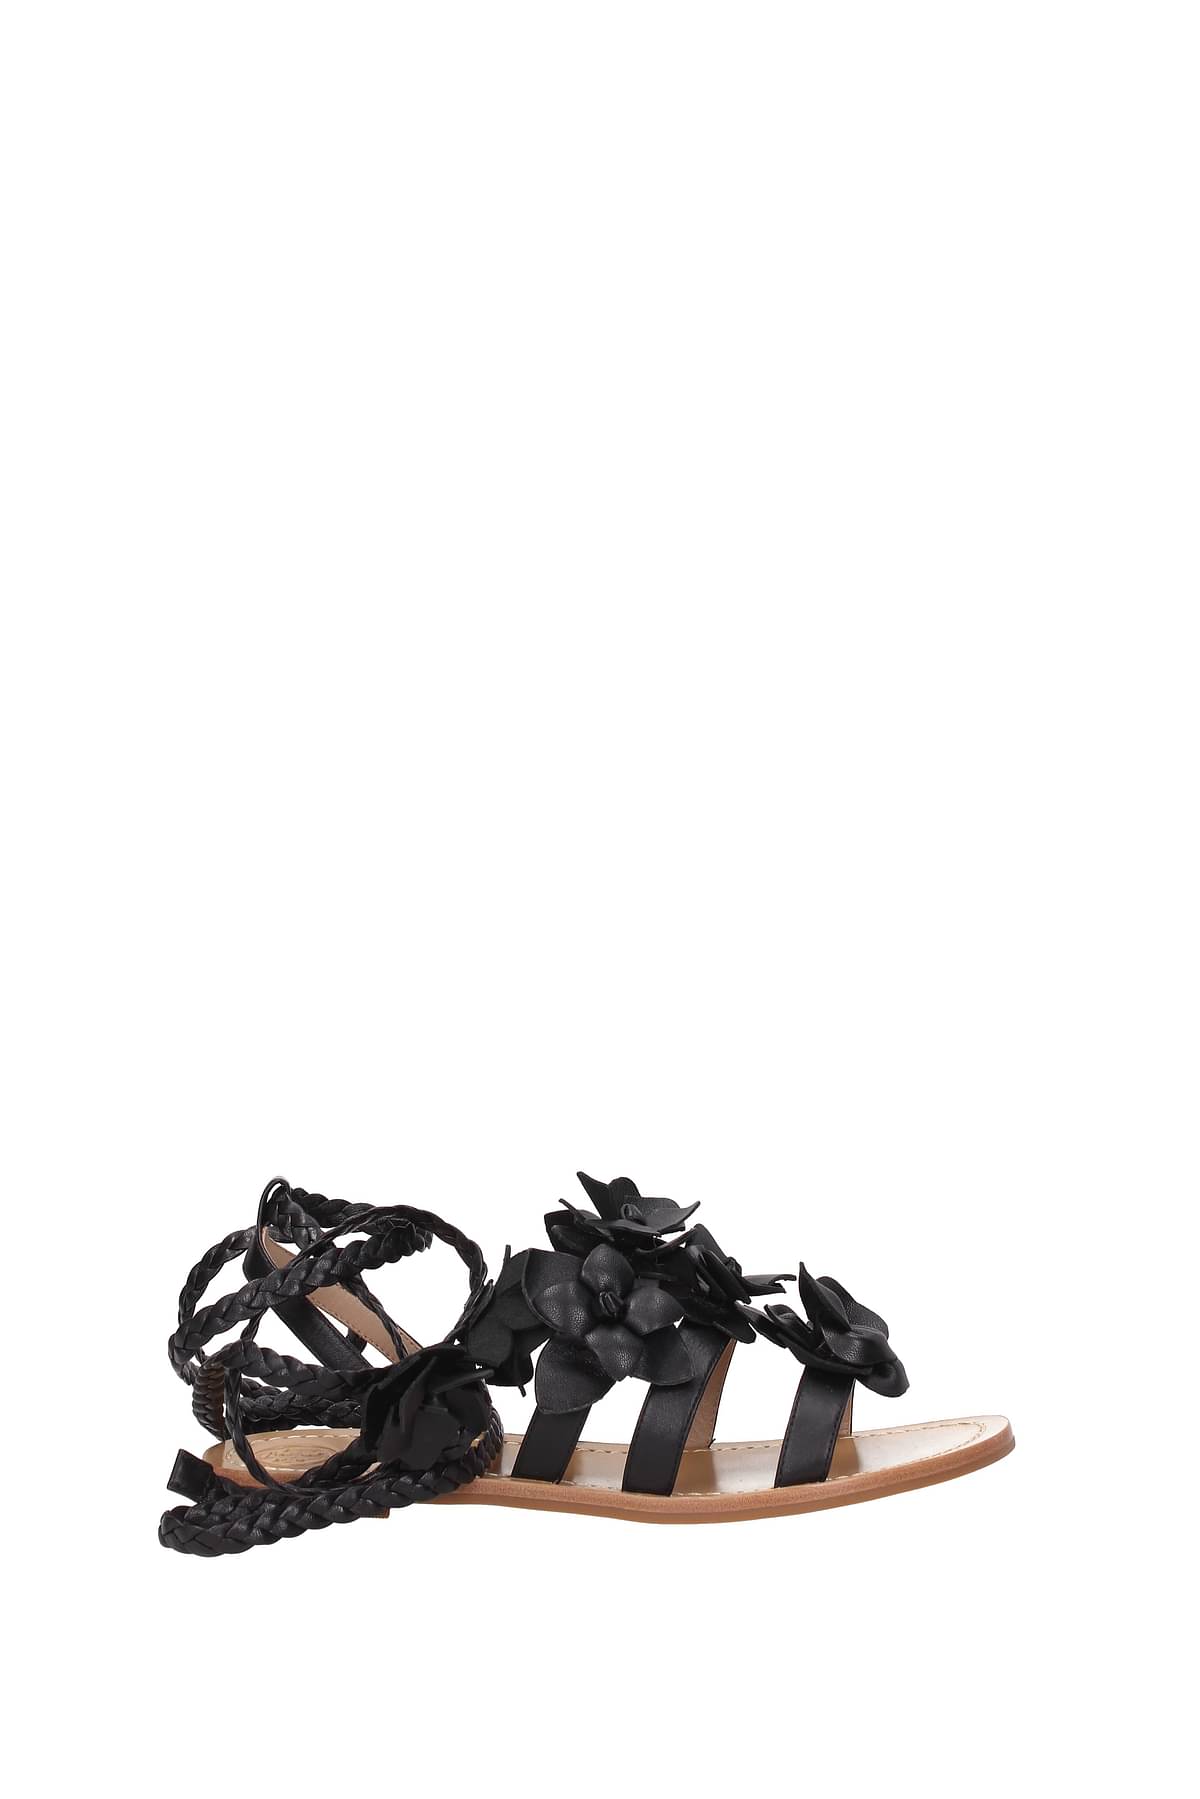 Tory Burch Sandals blossom gladiator Women 33200001 Leather 110,63€